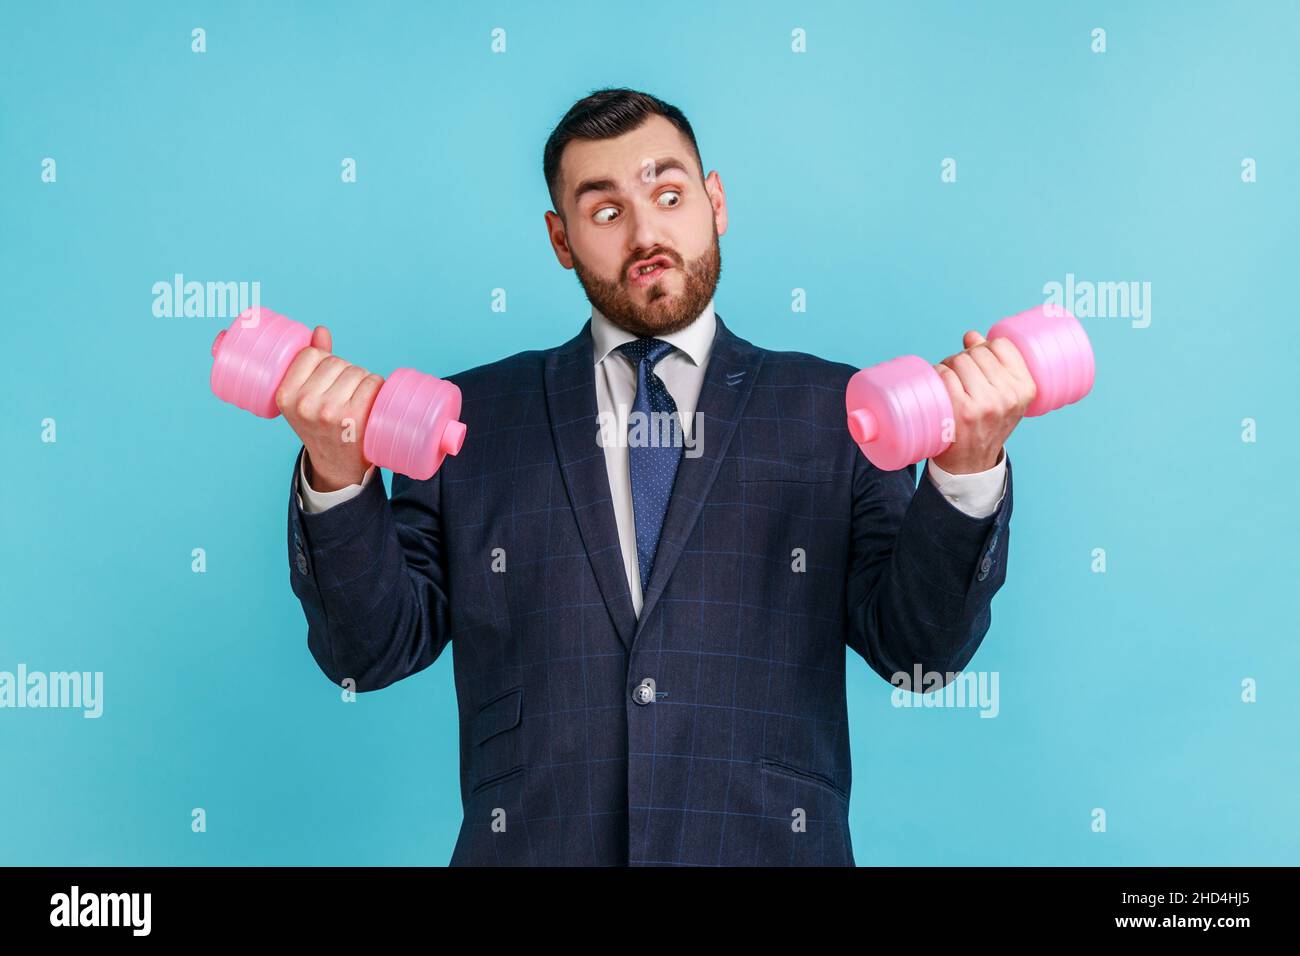 Portrait of funny bearded businessman wearing official style suit, holding in hands pink heavy dumbbells and raising arms, workout in office. Indoor studio shot isolated on blue background. Stock Photo